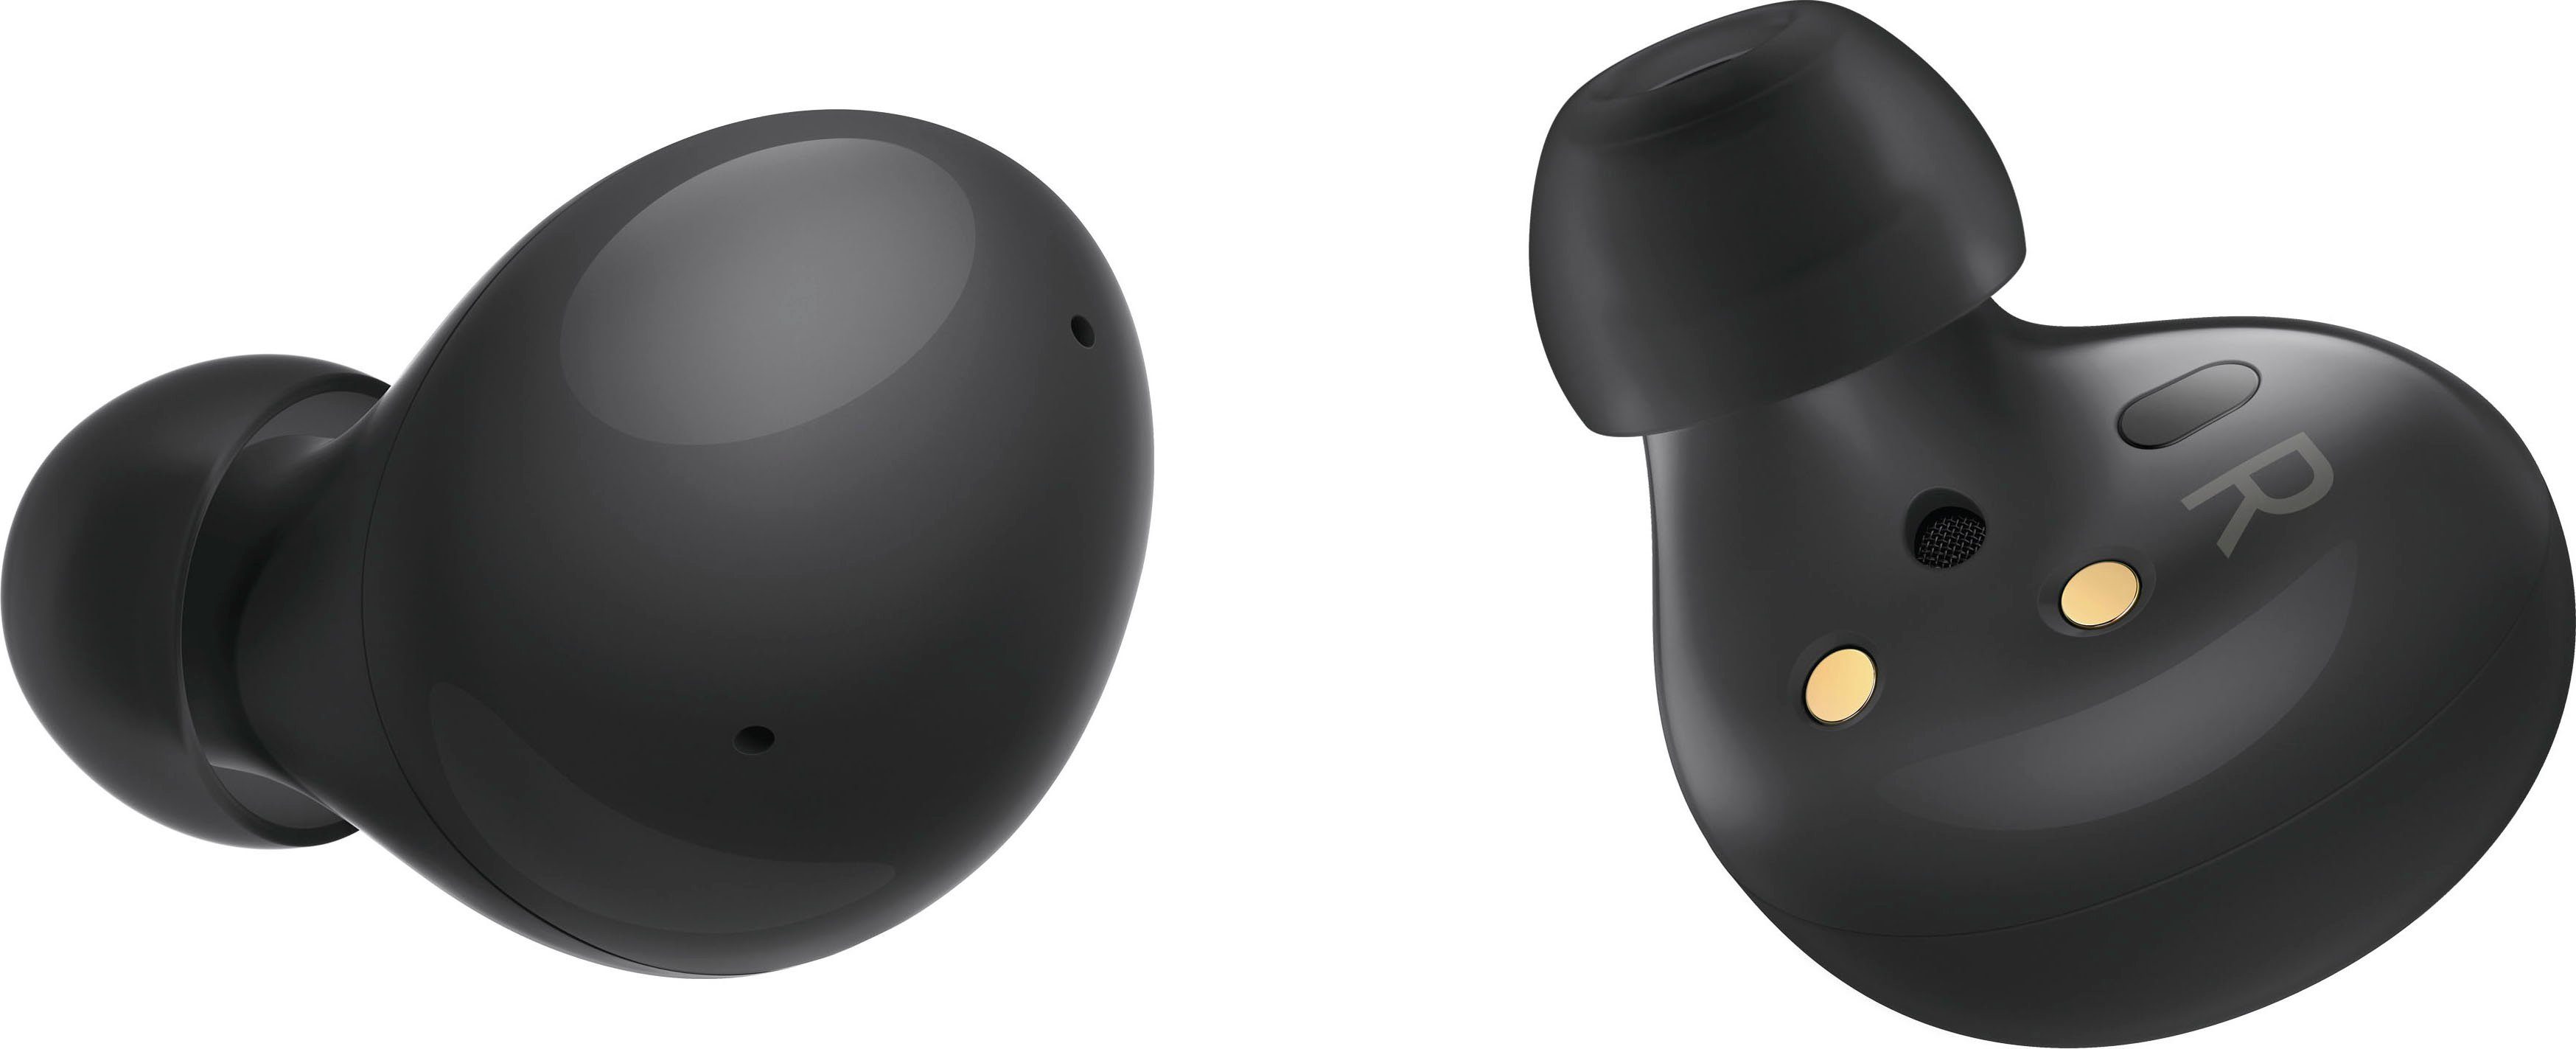 Samsung Galaxy Buds2 Навушники-вкладиші (Active Noise Cancelling (ANC), Bluetooth)